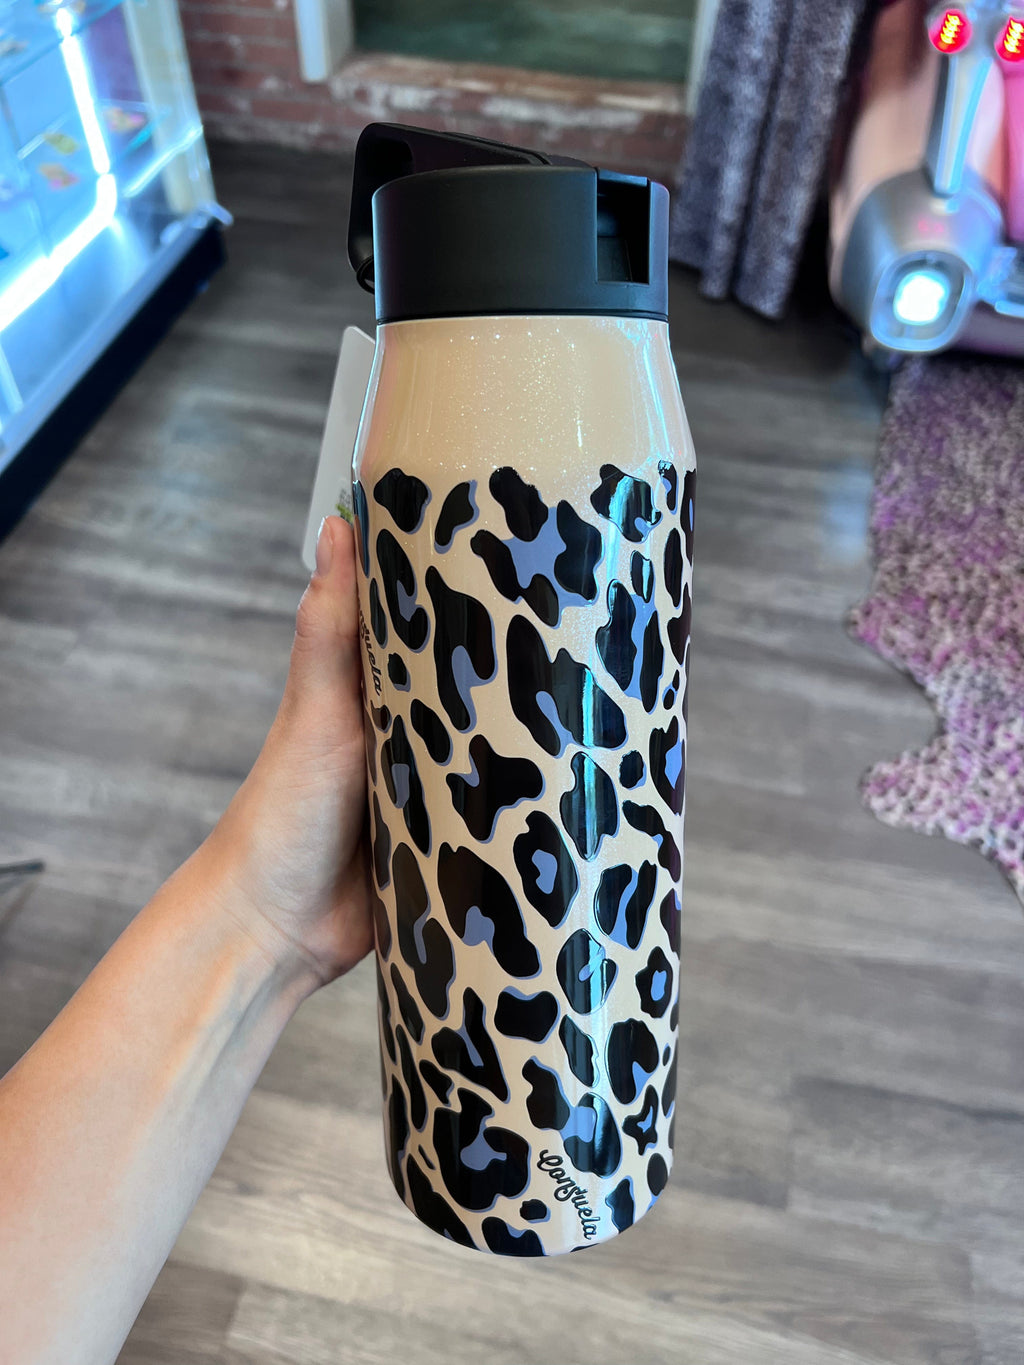 FERAL Hydro Flask 32 oz. Wide Mouth Insulated Water Bottle - FERAL